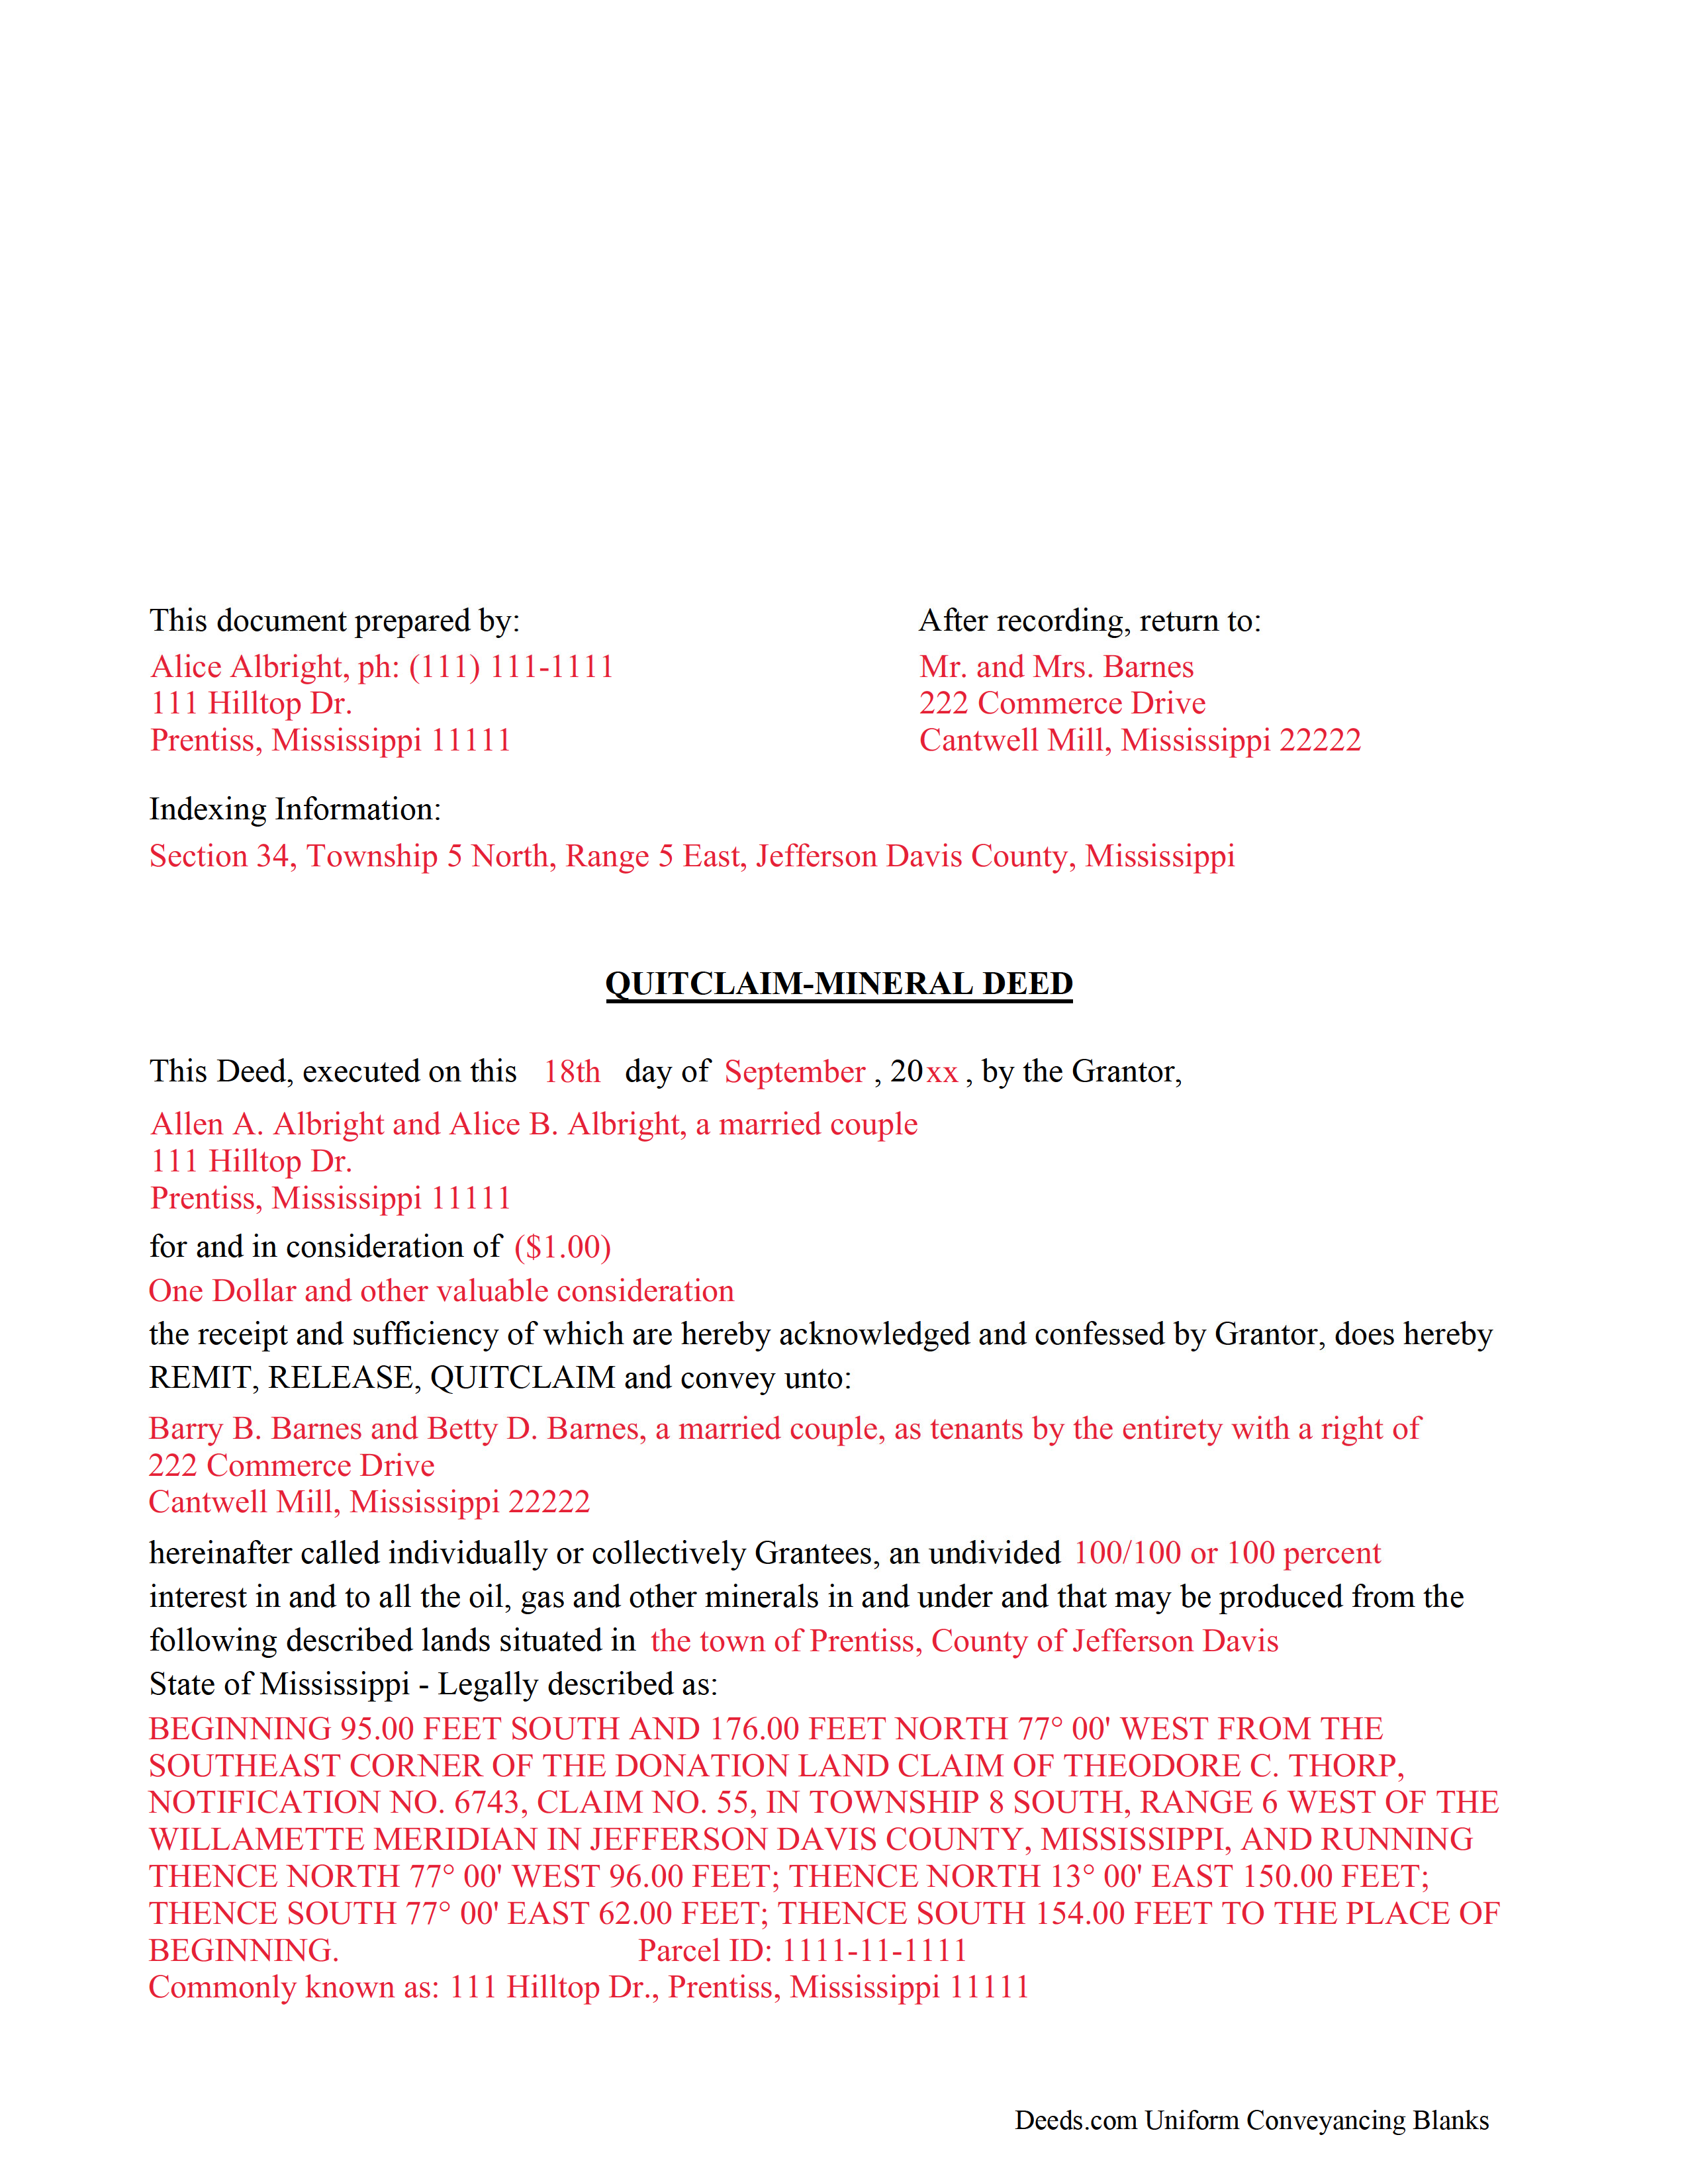 Completed Example of the Mineral Deed with Quitclaim Covenants Document